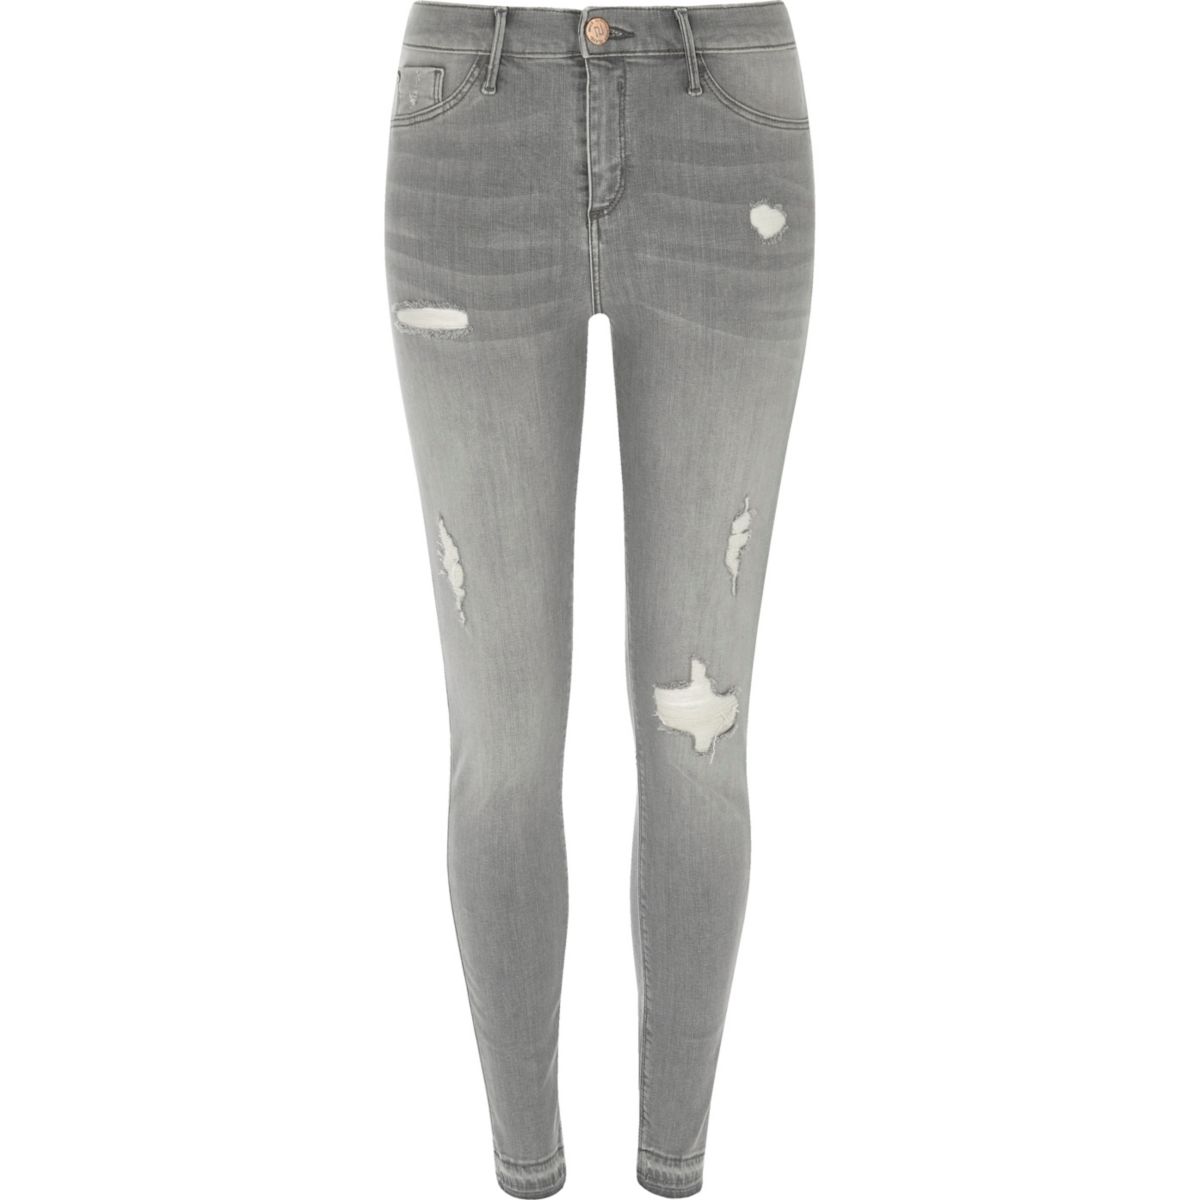 Grey Molly ripped skinny fit jeggings - Jeans - Sale - women